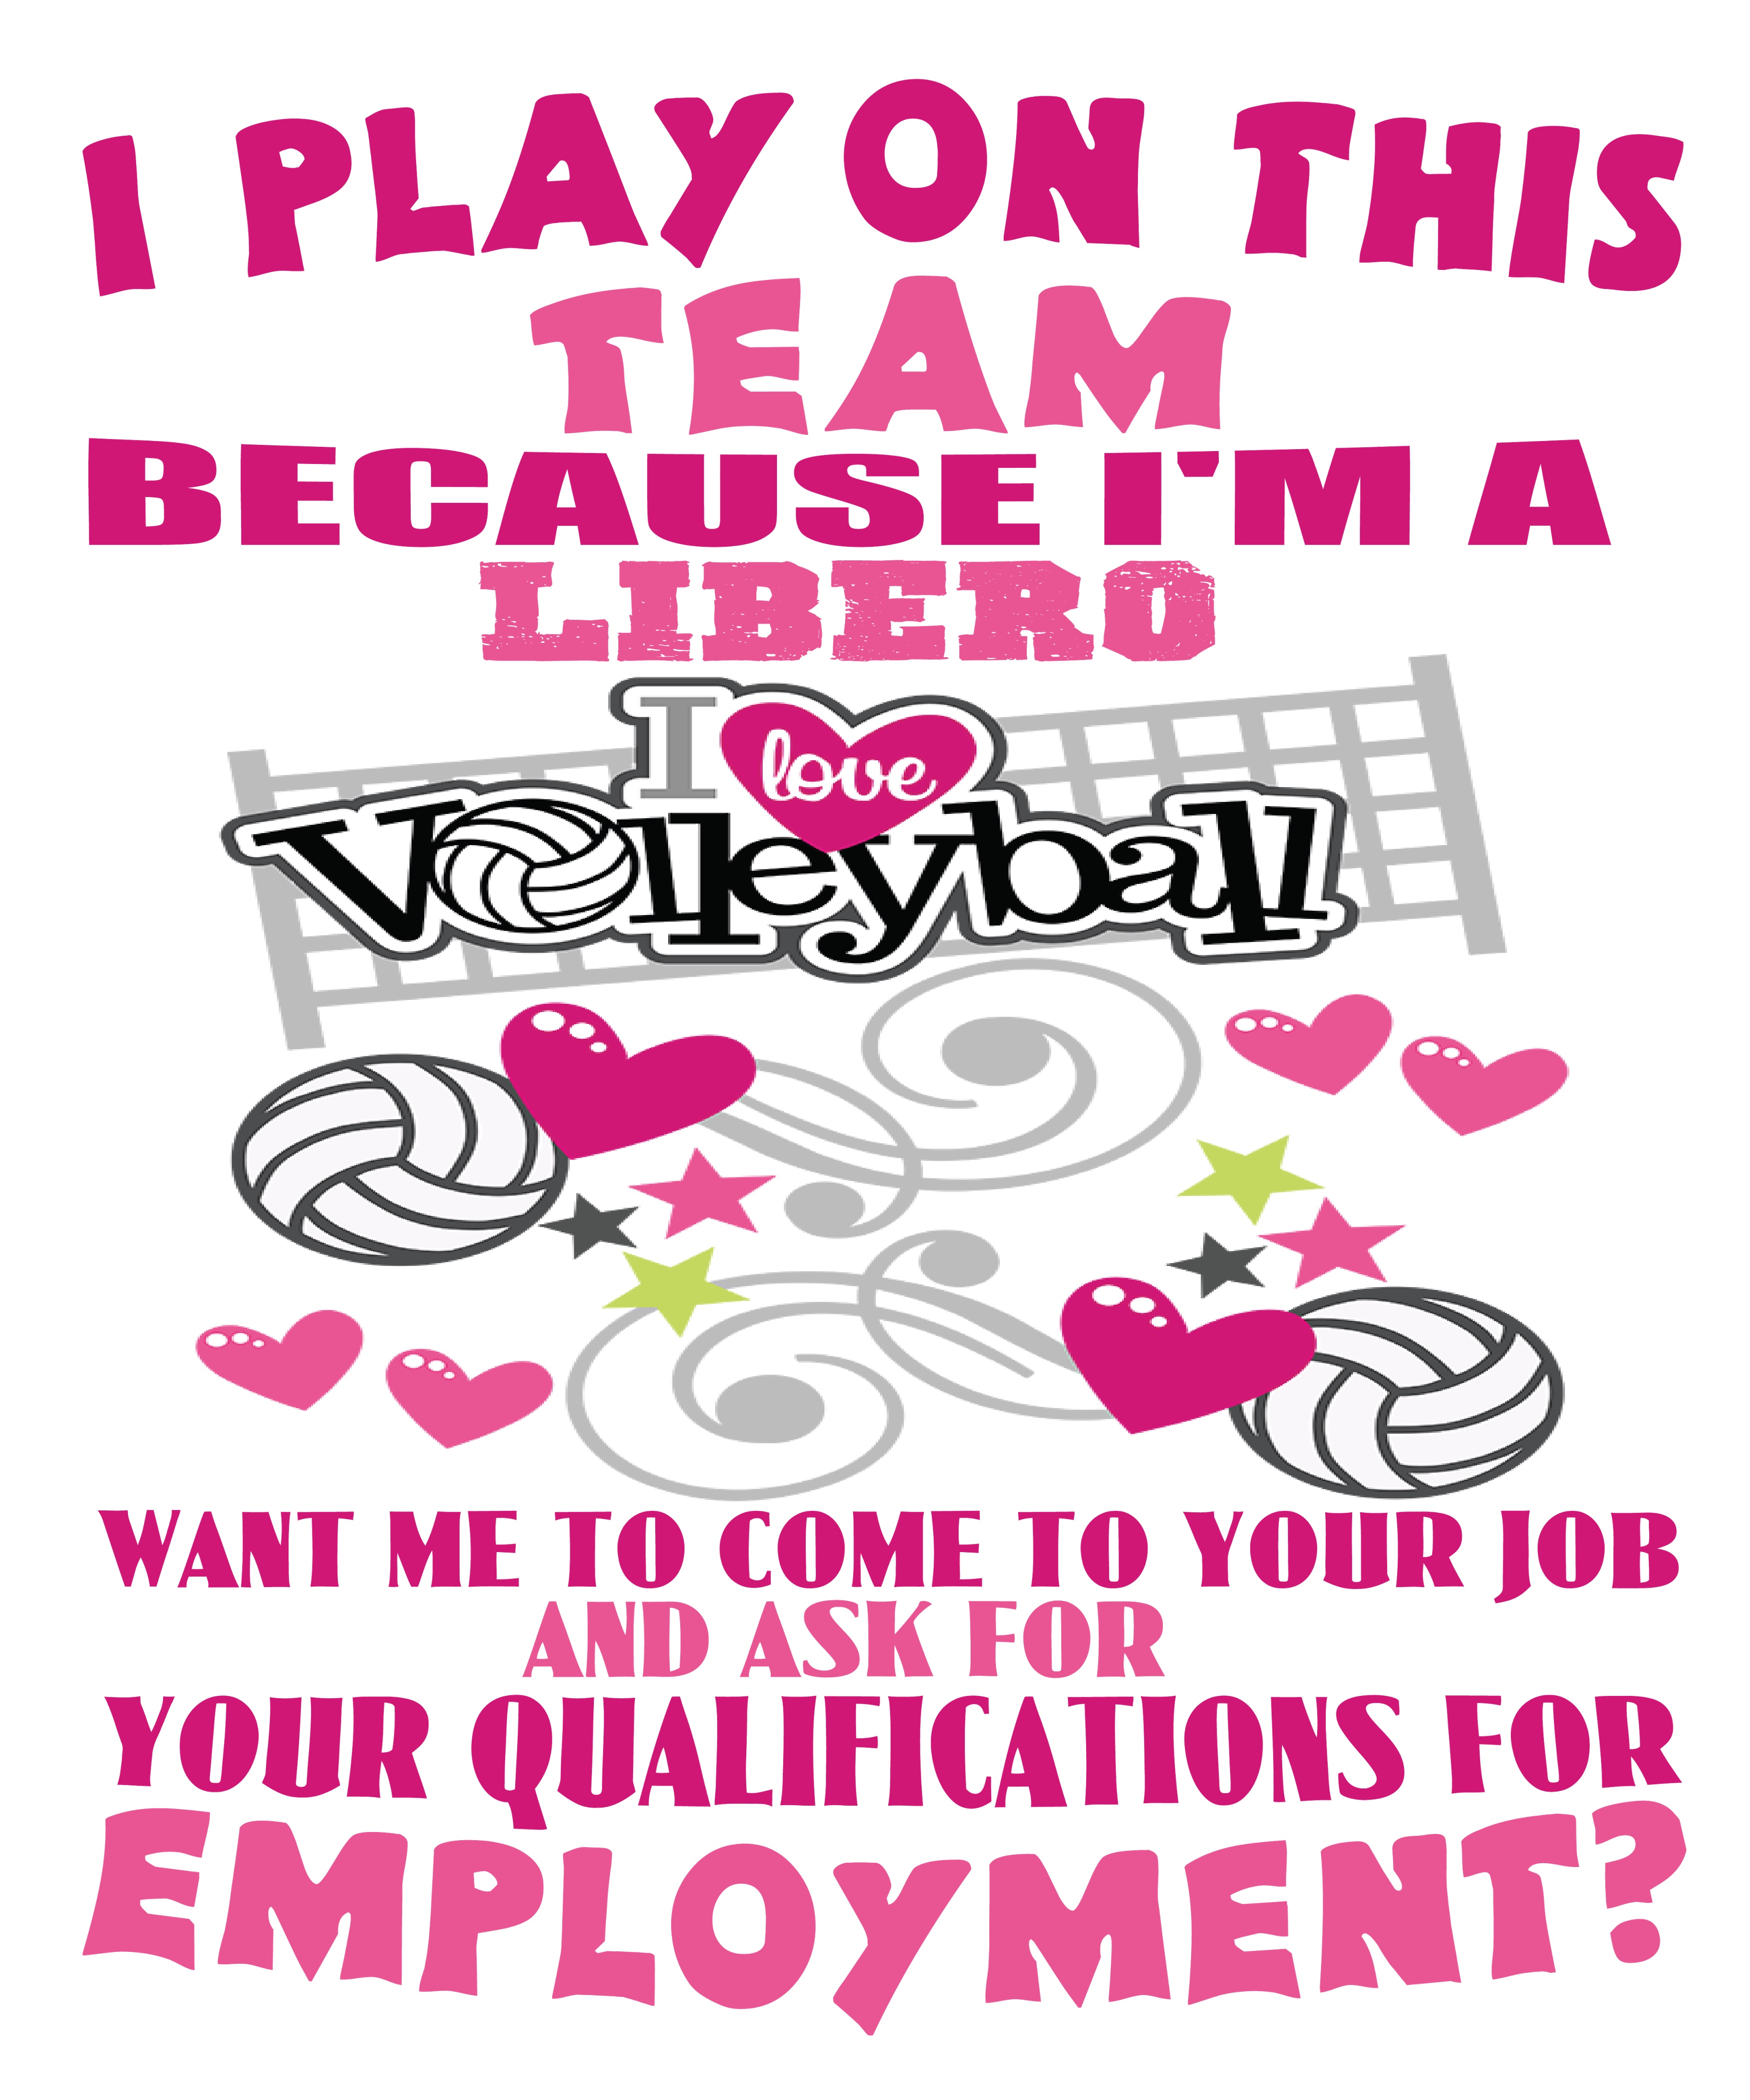 I am on this team because Im a LIBERO and other Volleybragswag volleyball t shirts sayings on DearVolleyball.com